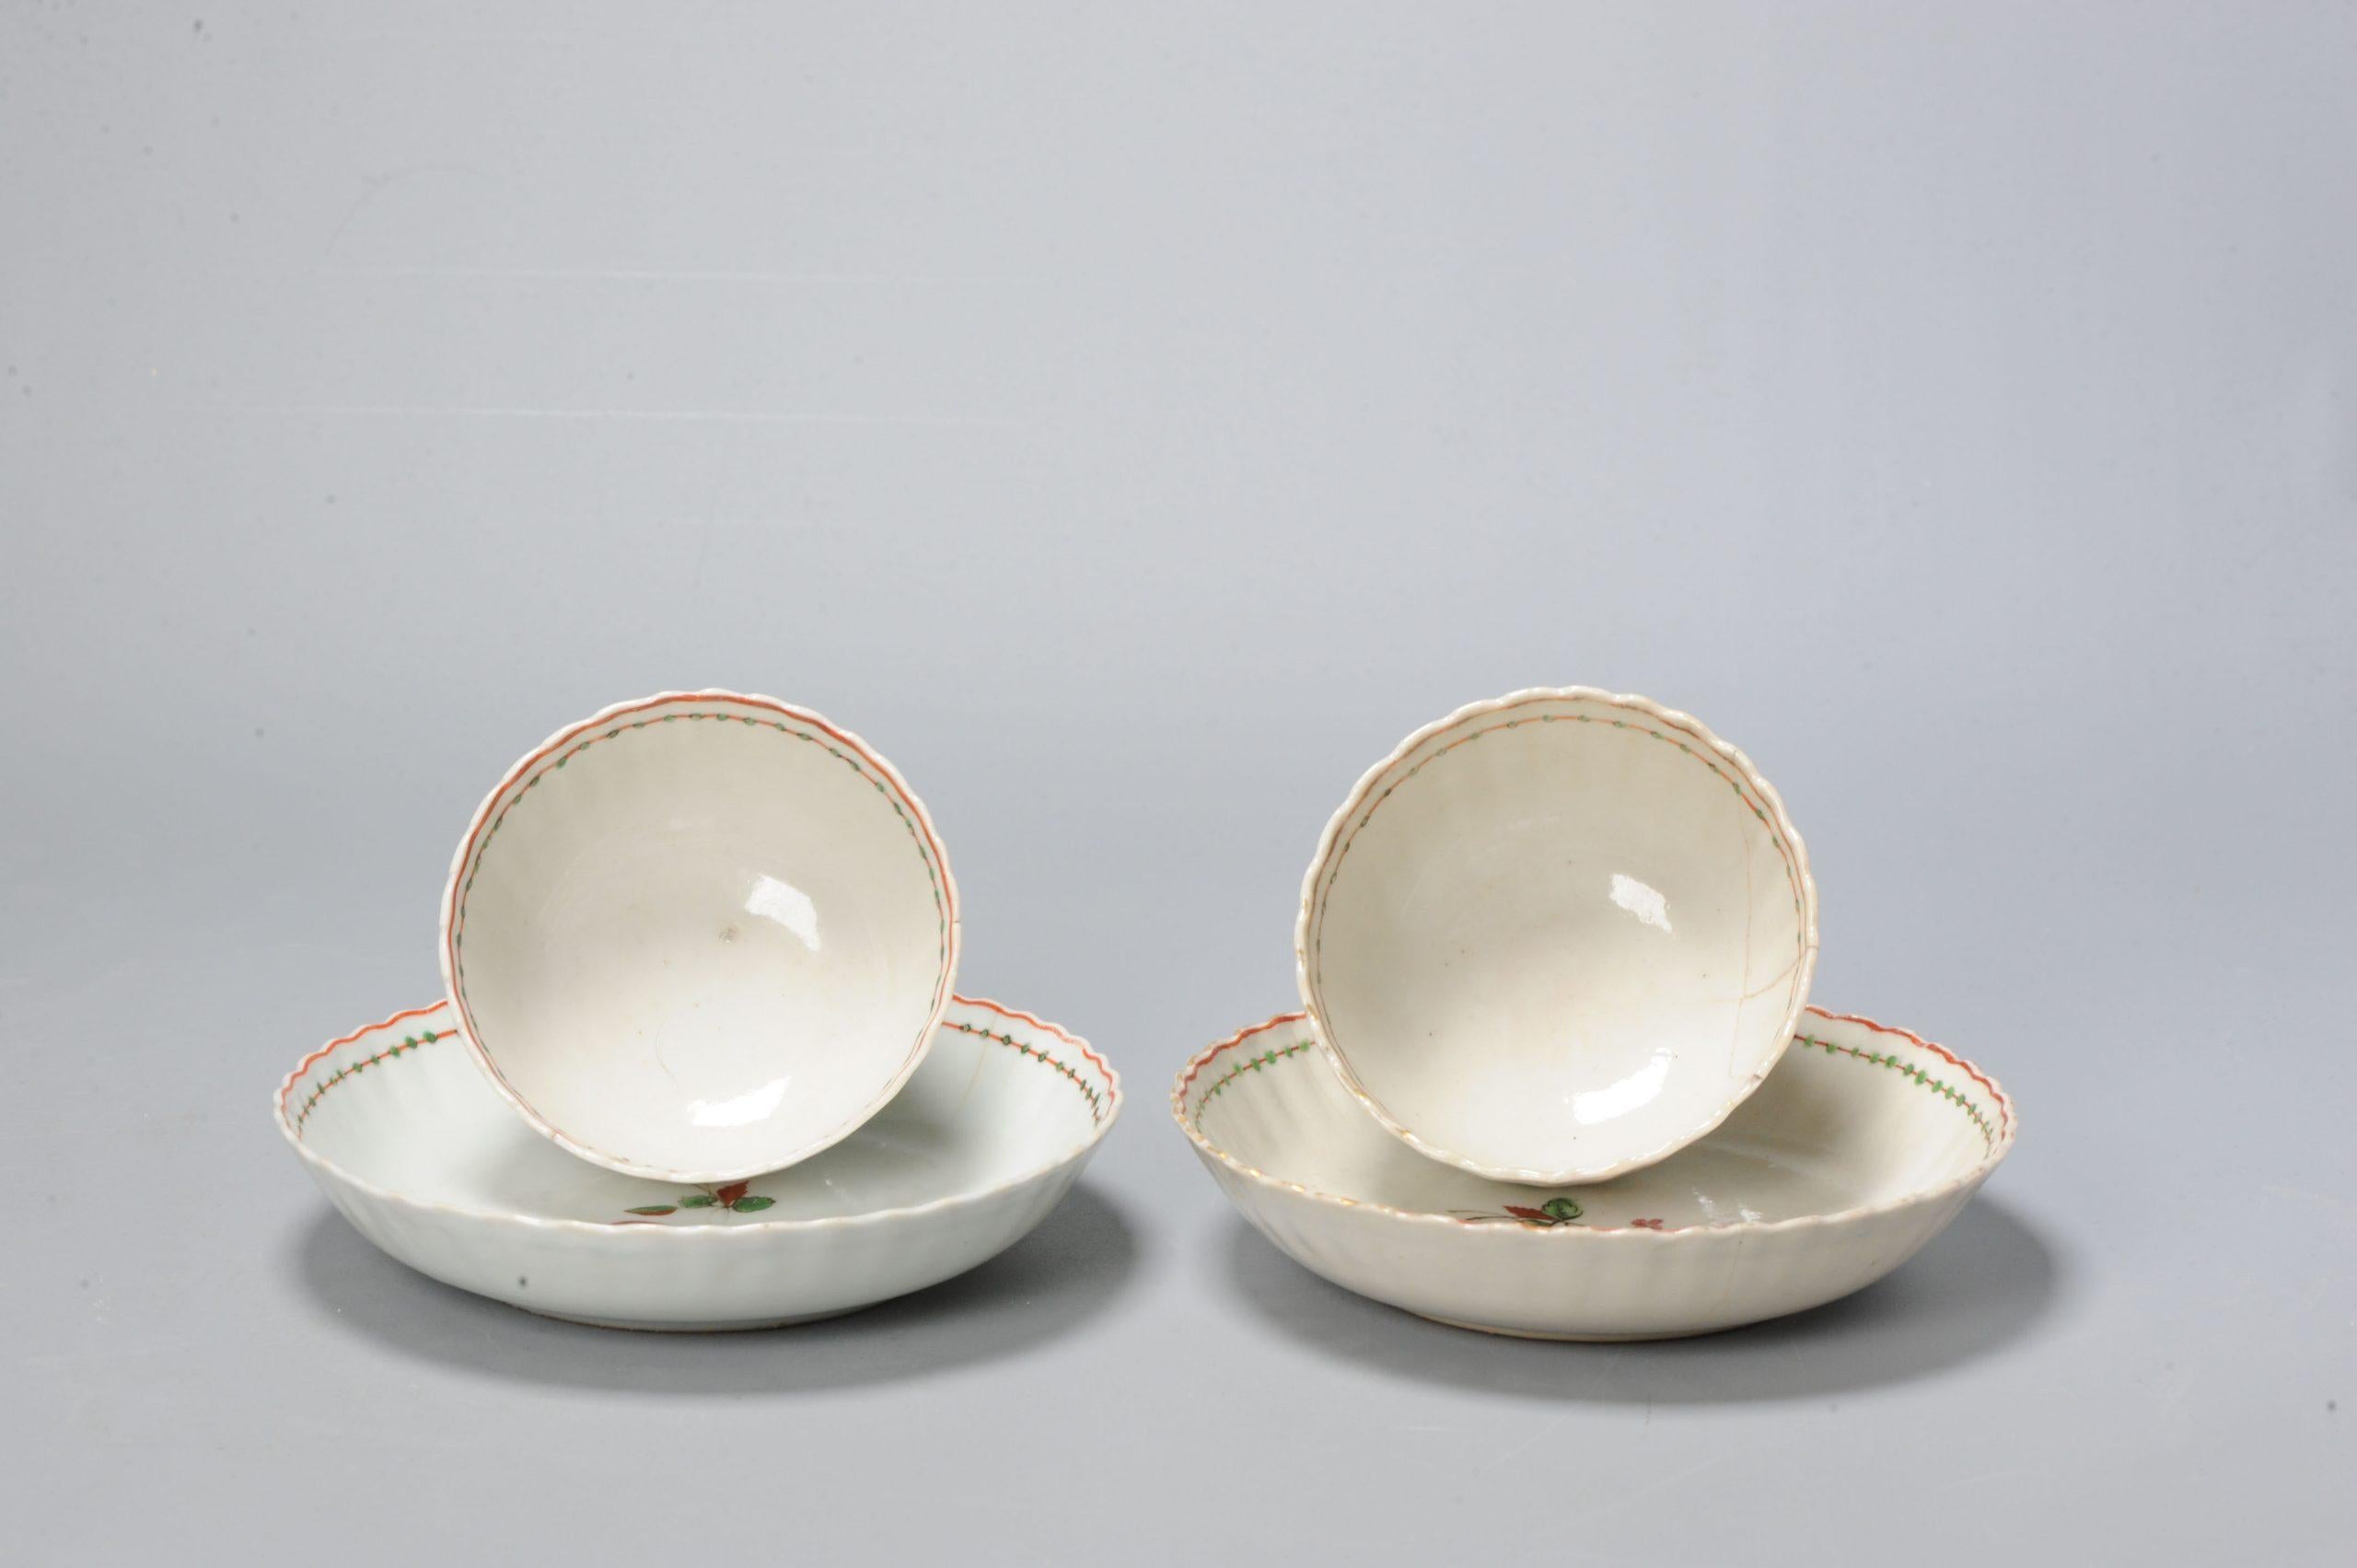 Set of 4 Antique Chinese Porcelain Tea Set China Chine de Commande, 18th Century In Good Condition For Sale In Amsterdam, Noord Holland